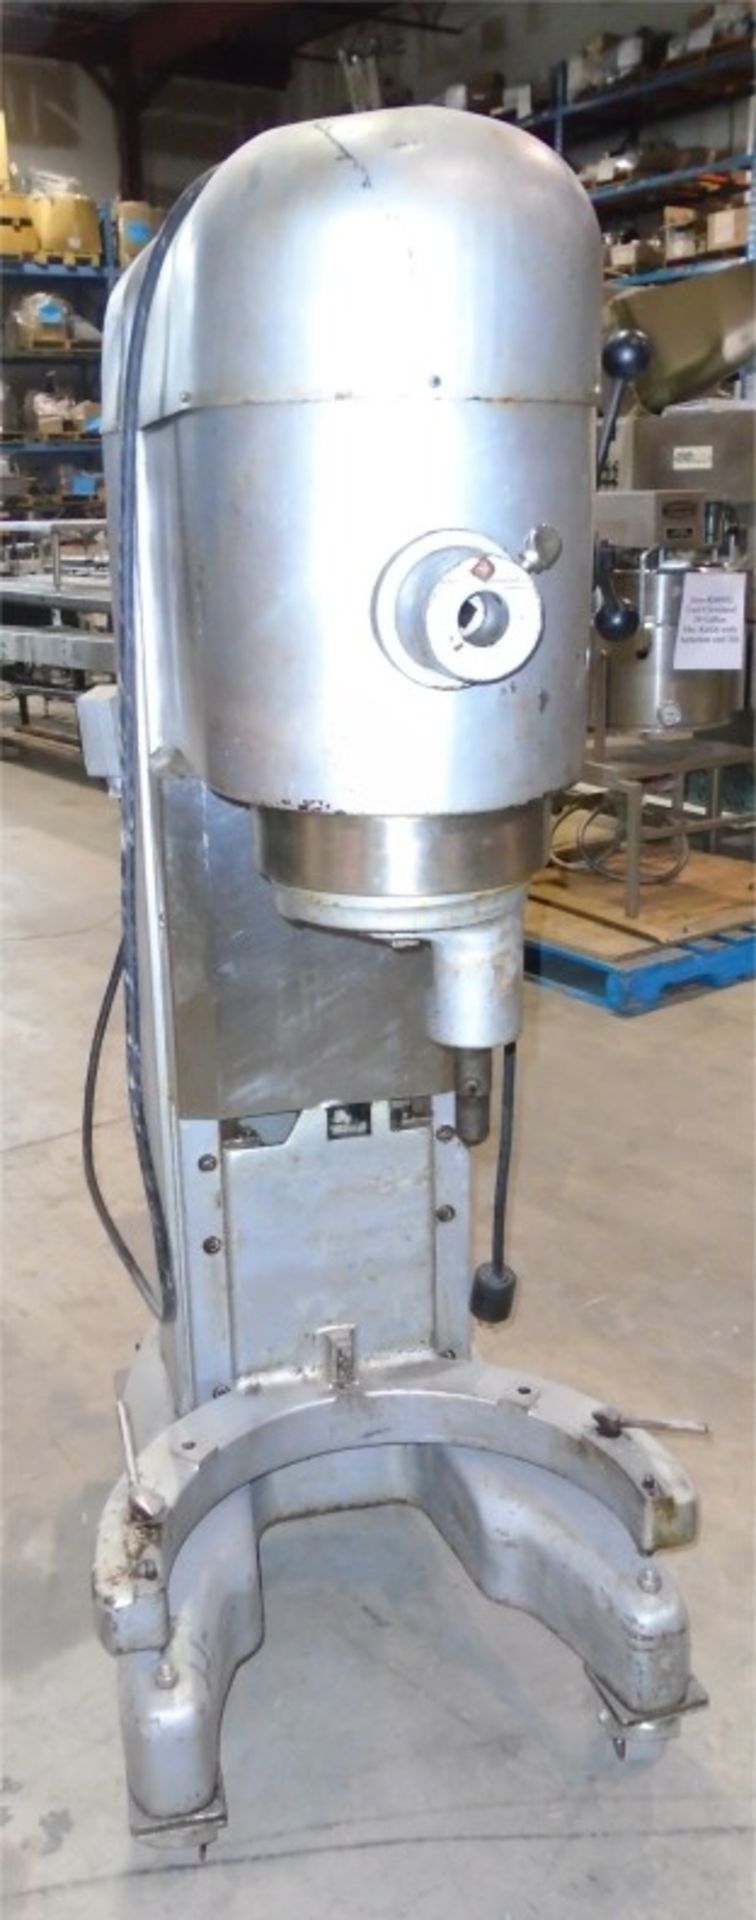 Used Hobart 80 Quart Vertical Mixer Model M802. Electrics: 2 HP, 3Ph/60Hz/208Volts Load Out Fee:100